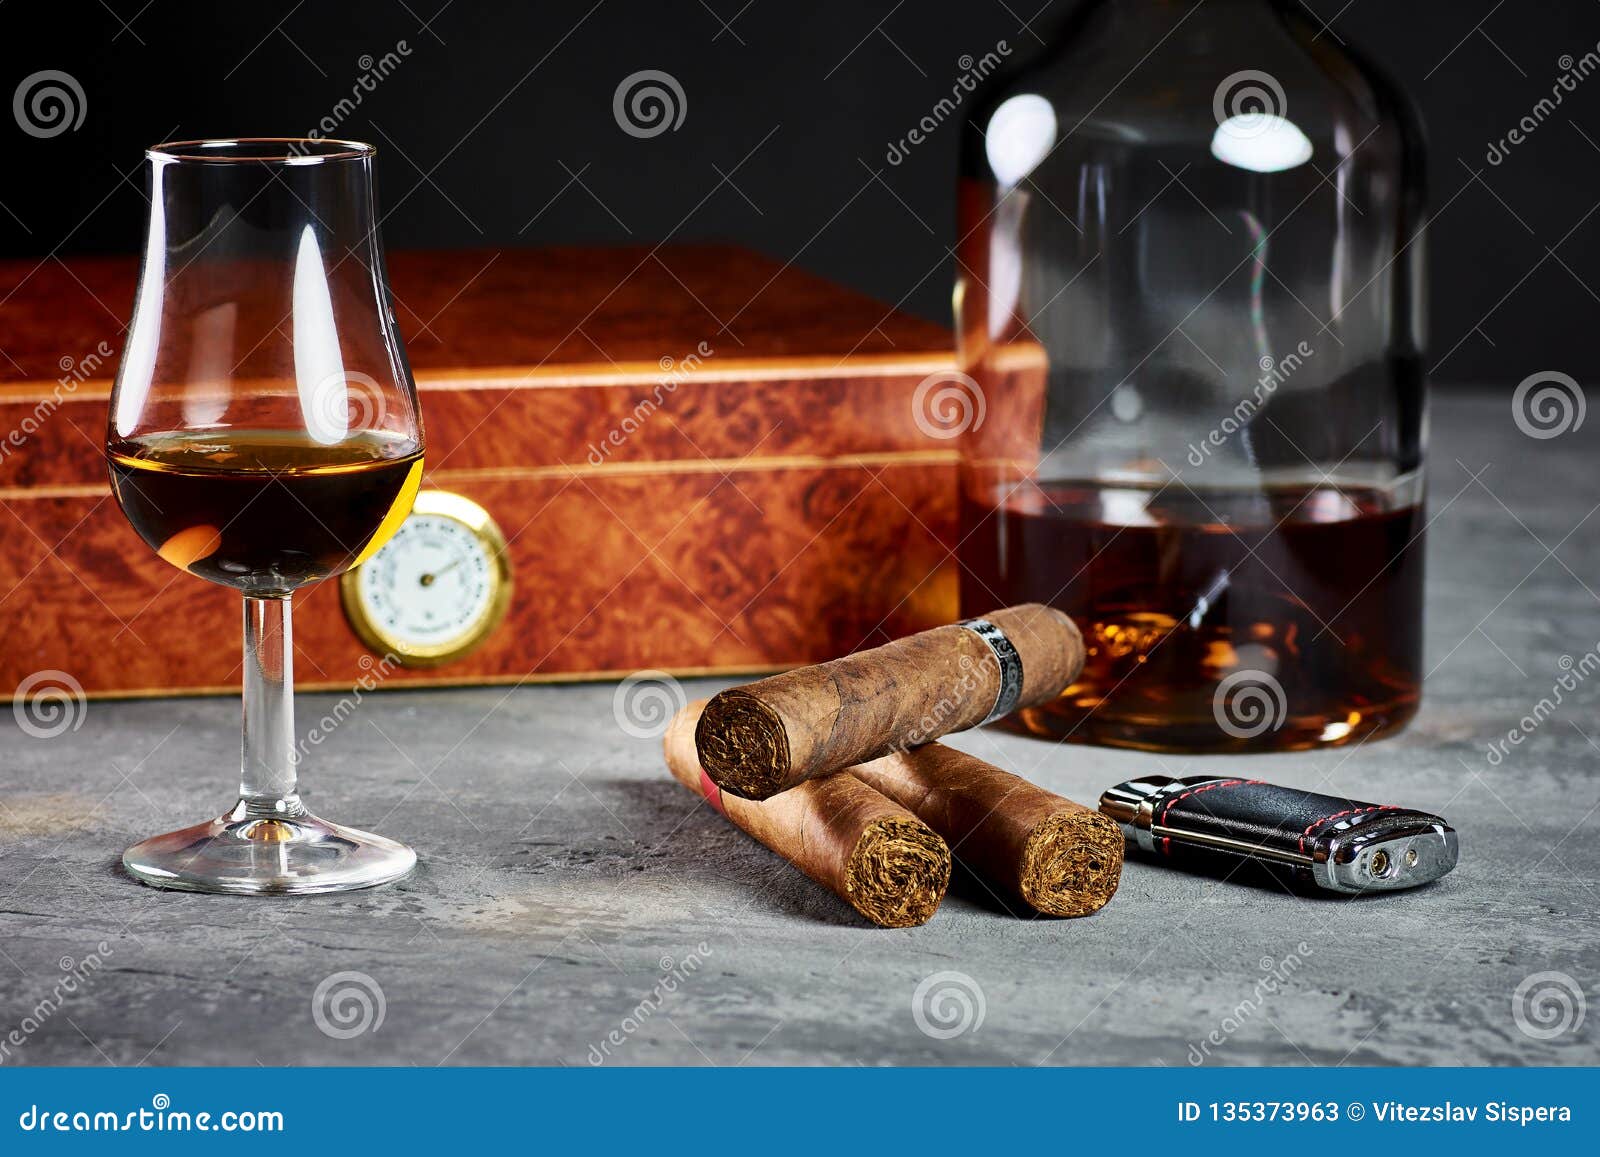 three cuban cigars on a stone table with a lighter and a wooden humidor with a glass and a bottle of whiskey